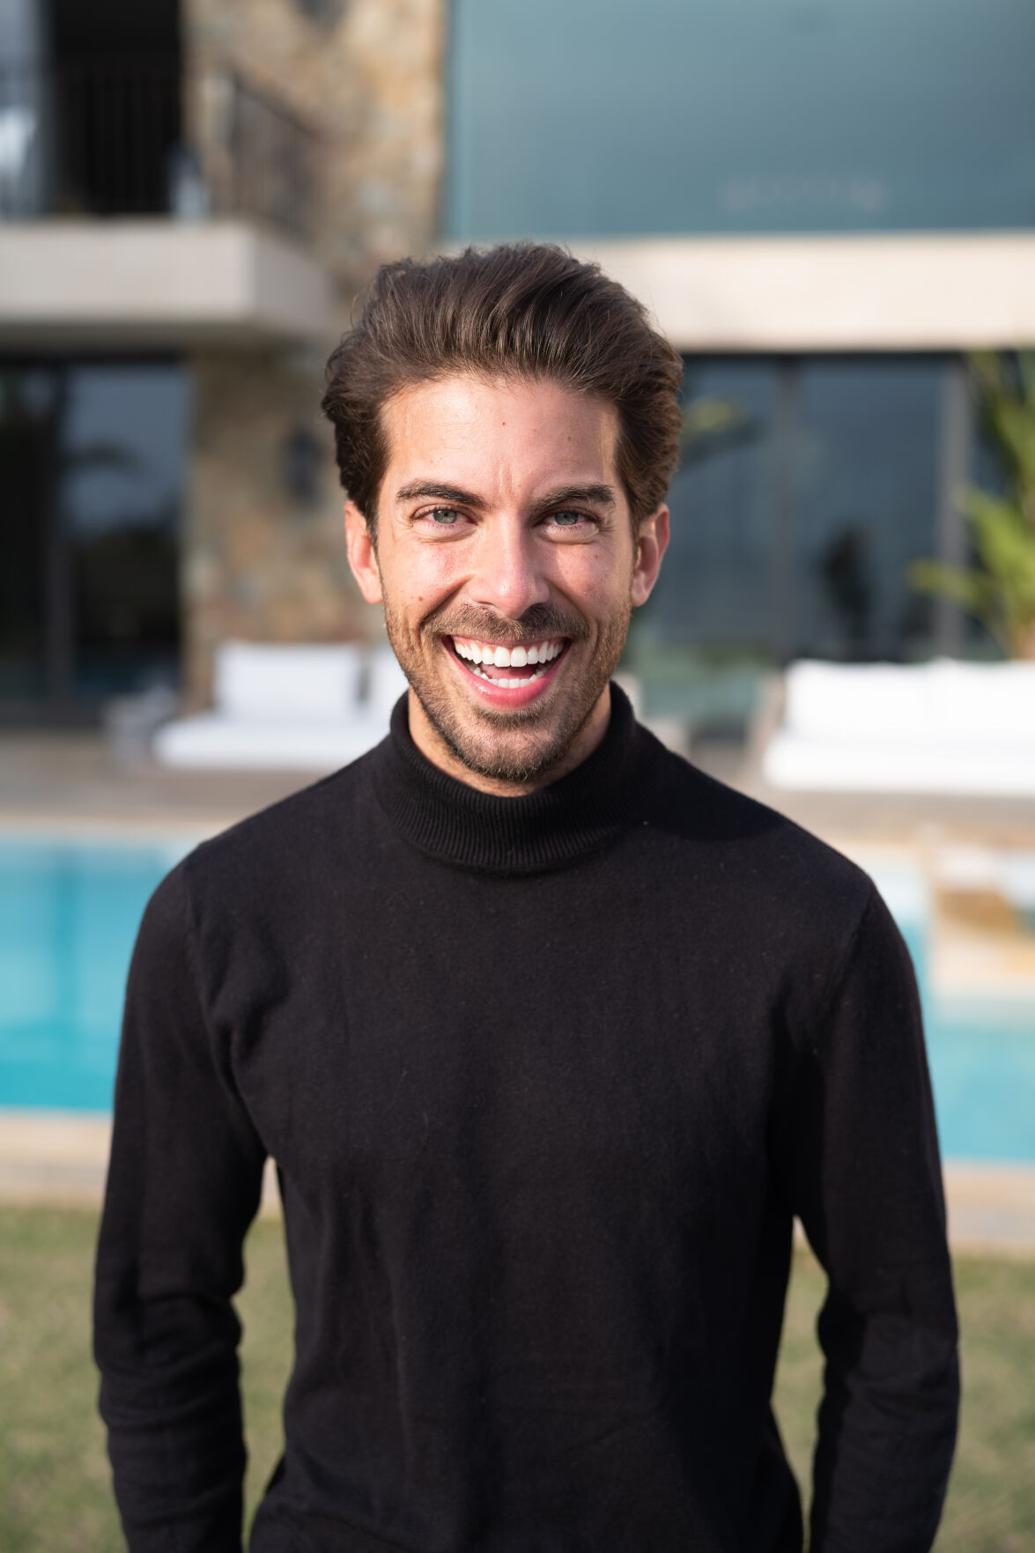 The perfect getaway An interview with Luis D. Ortiz of Netflix’s “The